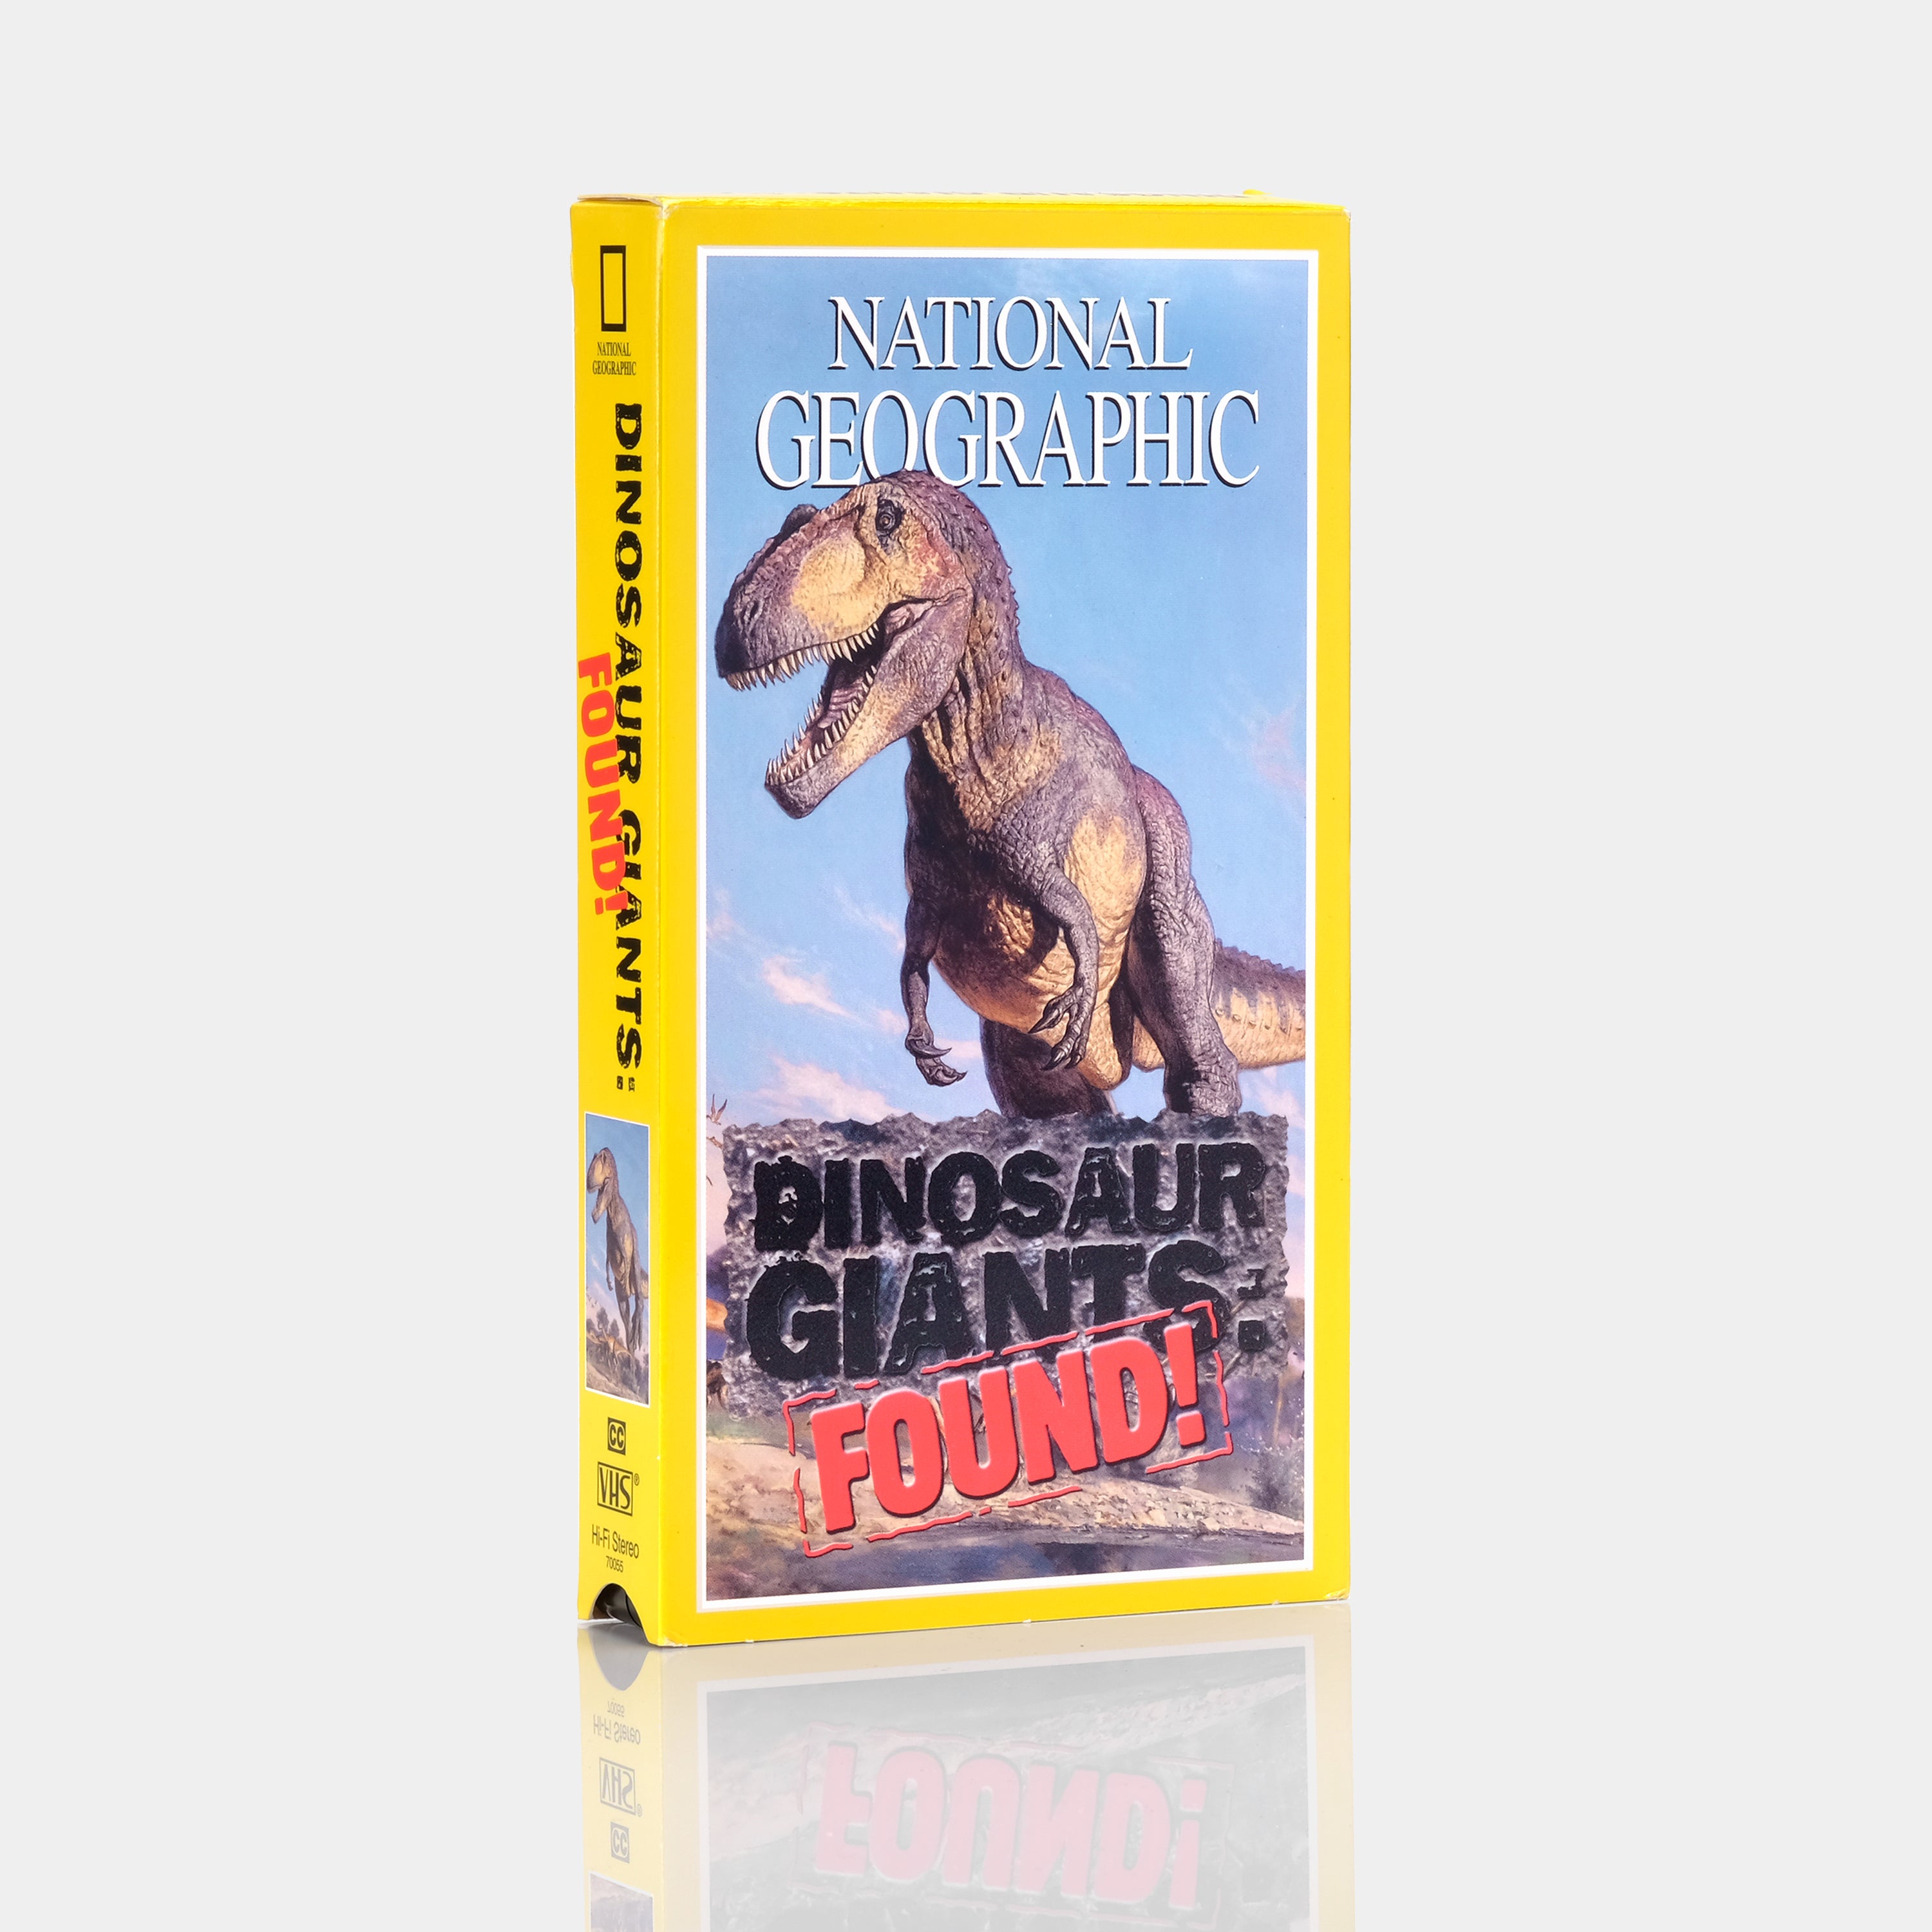 National Geographic-Dinosaur Giants: Found! VHS Tape